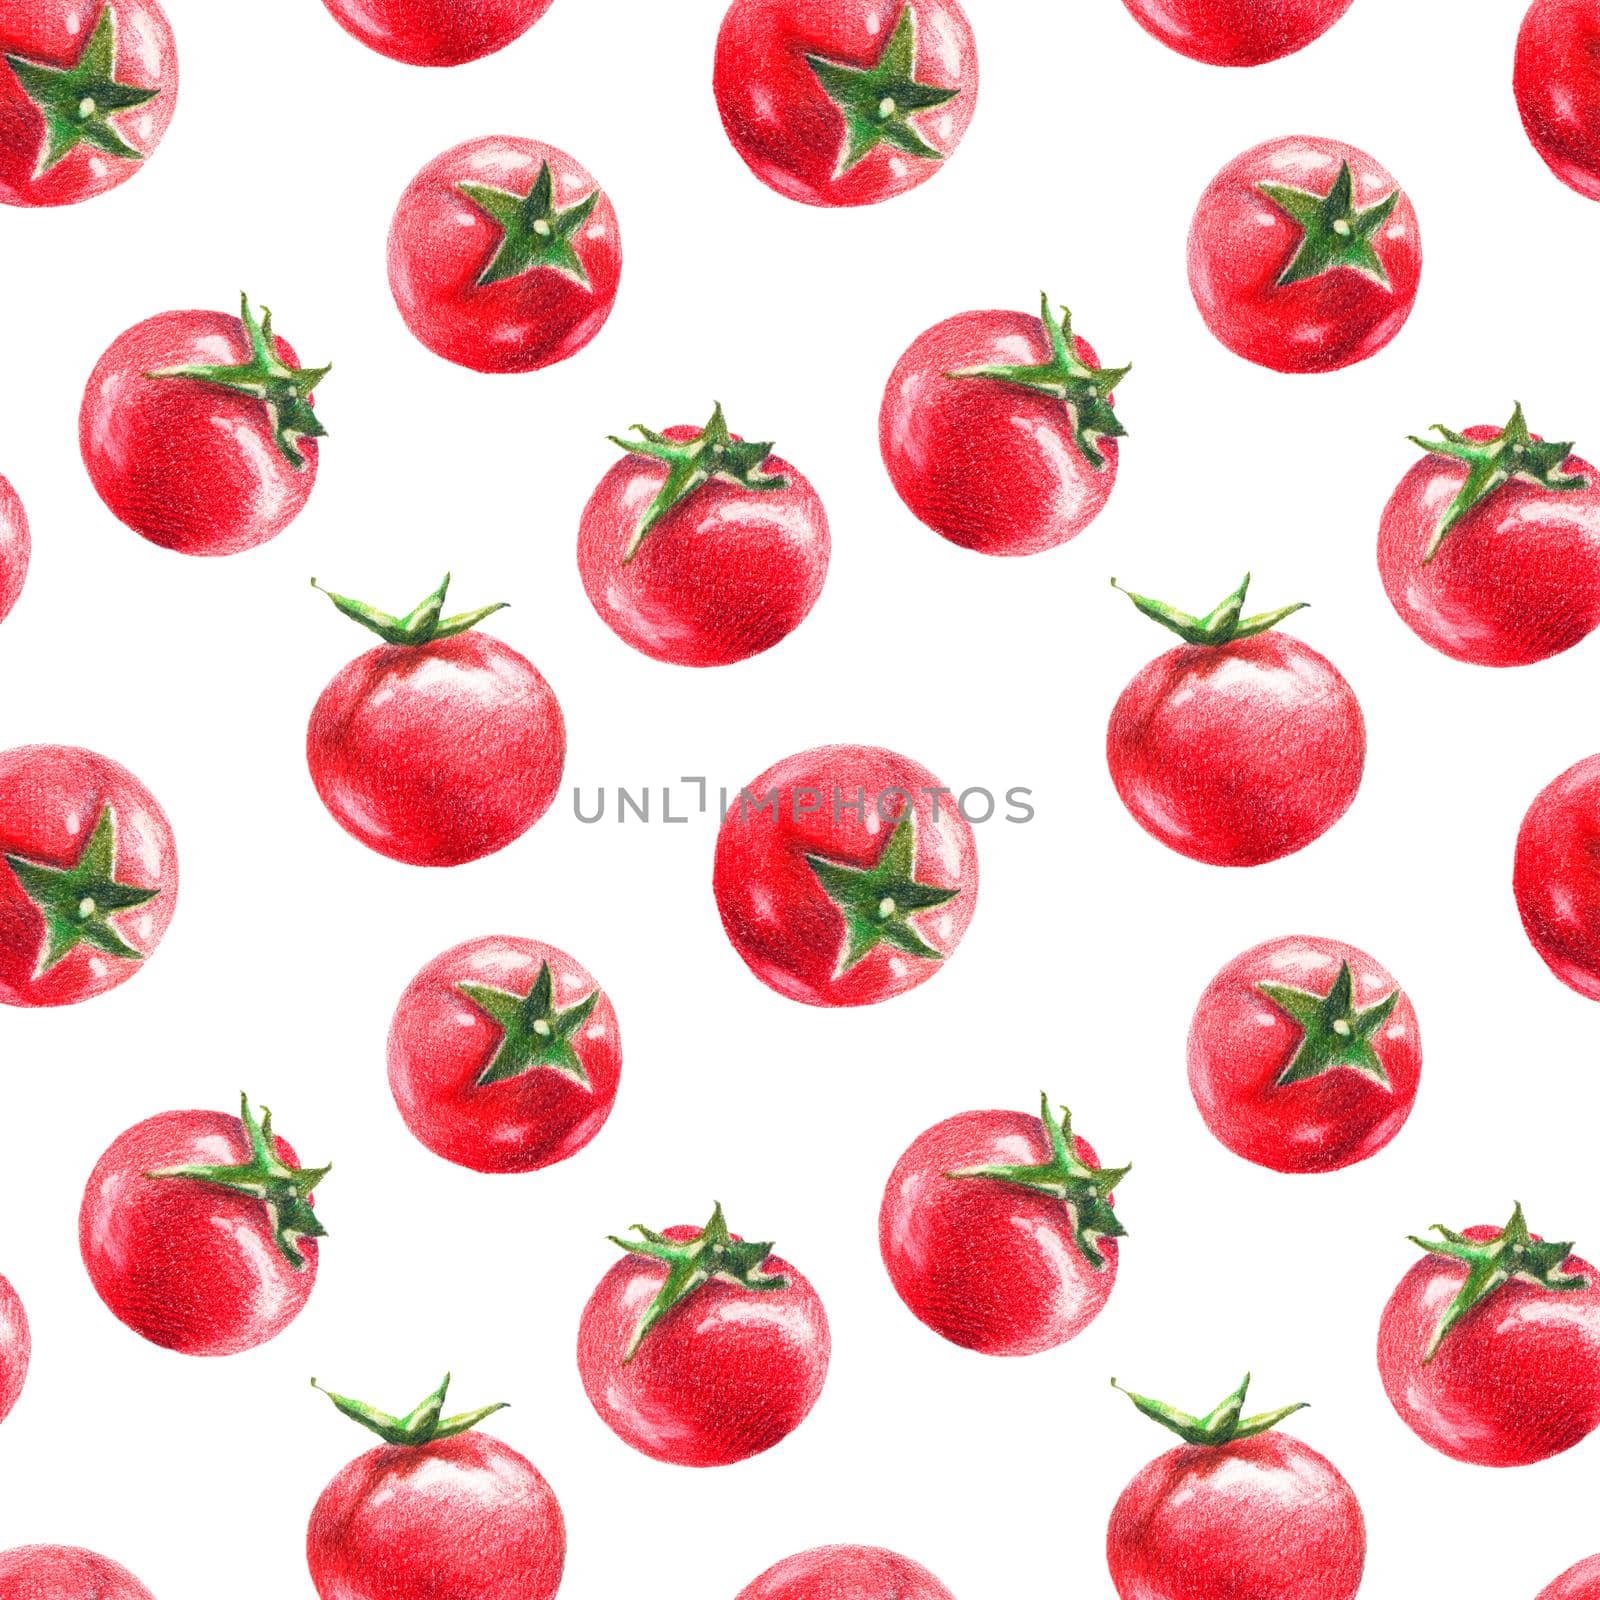 Color pencils realistic illustration of cherry tomatoes. Seamless pattern of hand-drawn tomatoes on white background.